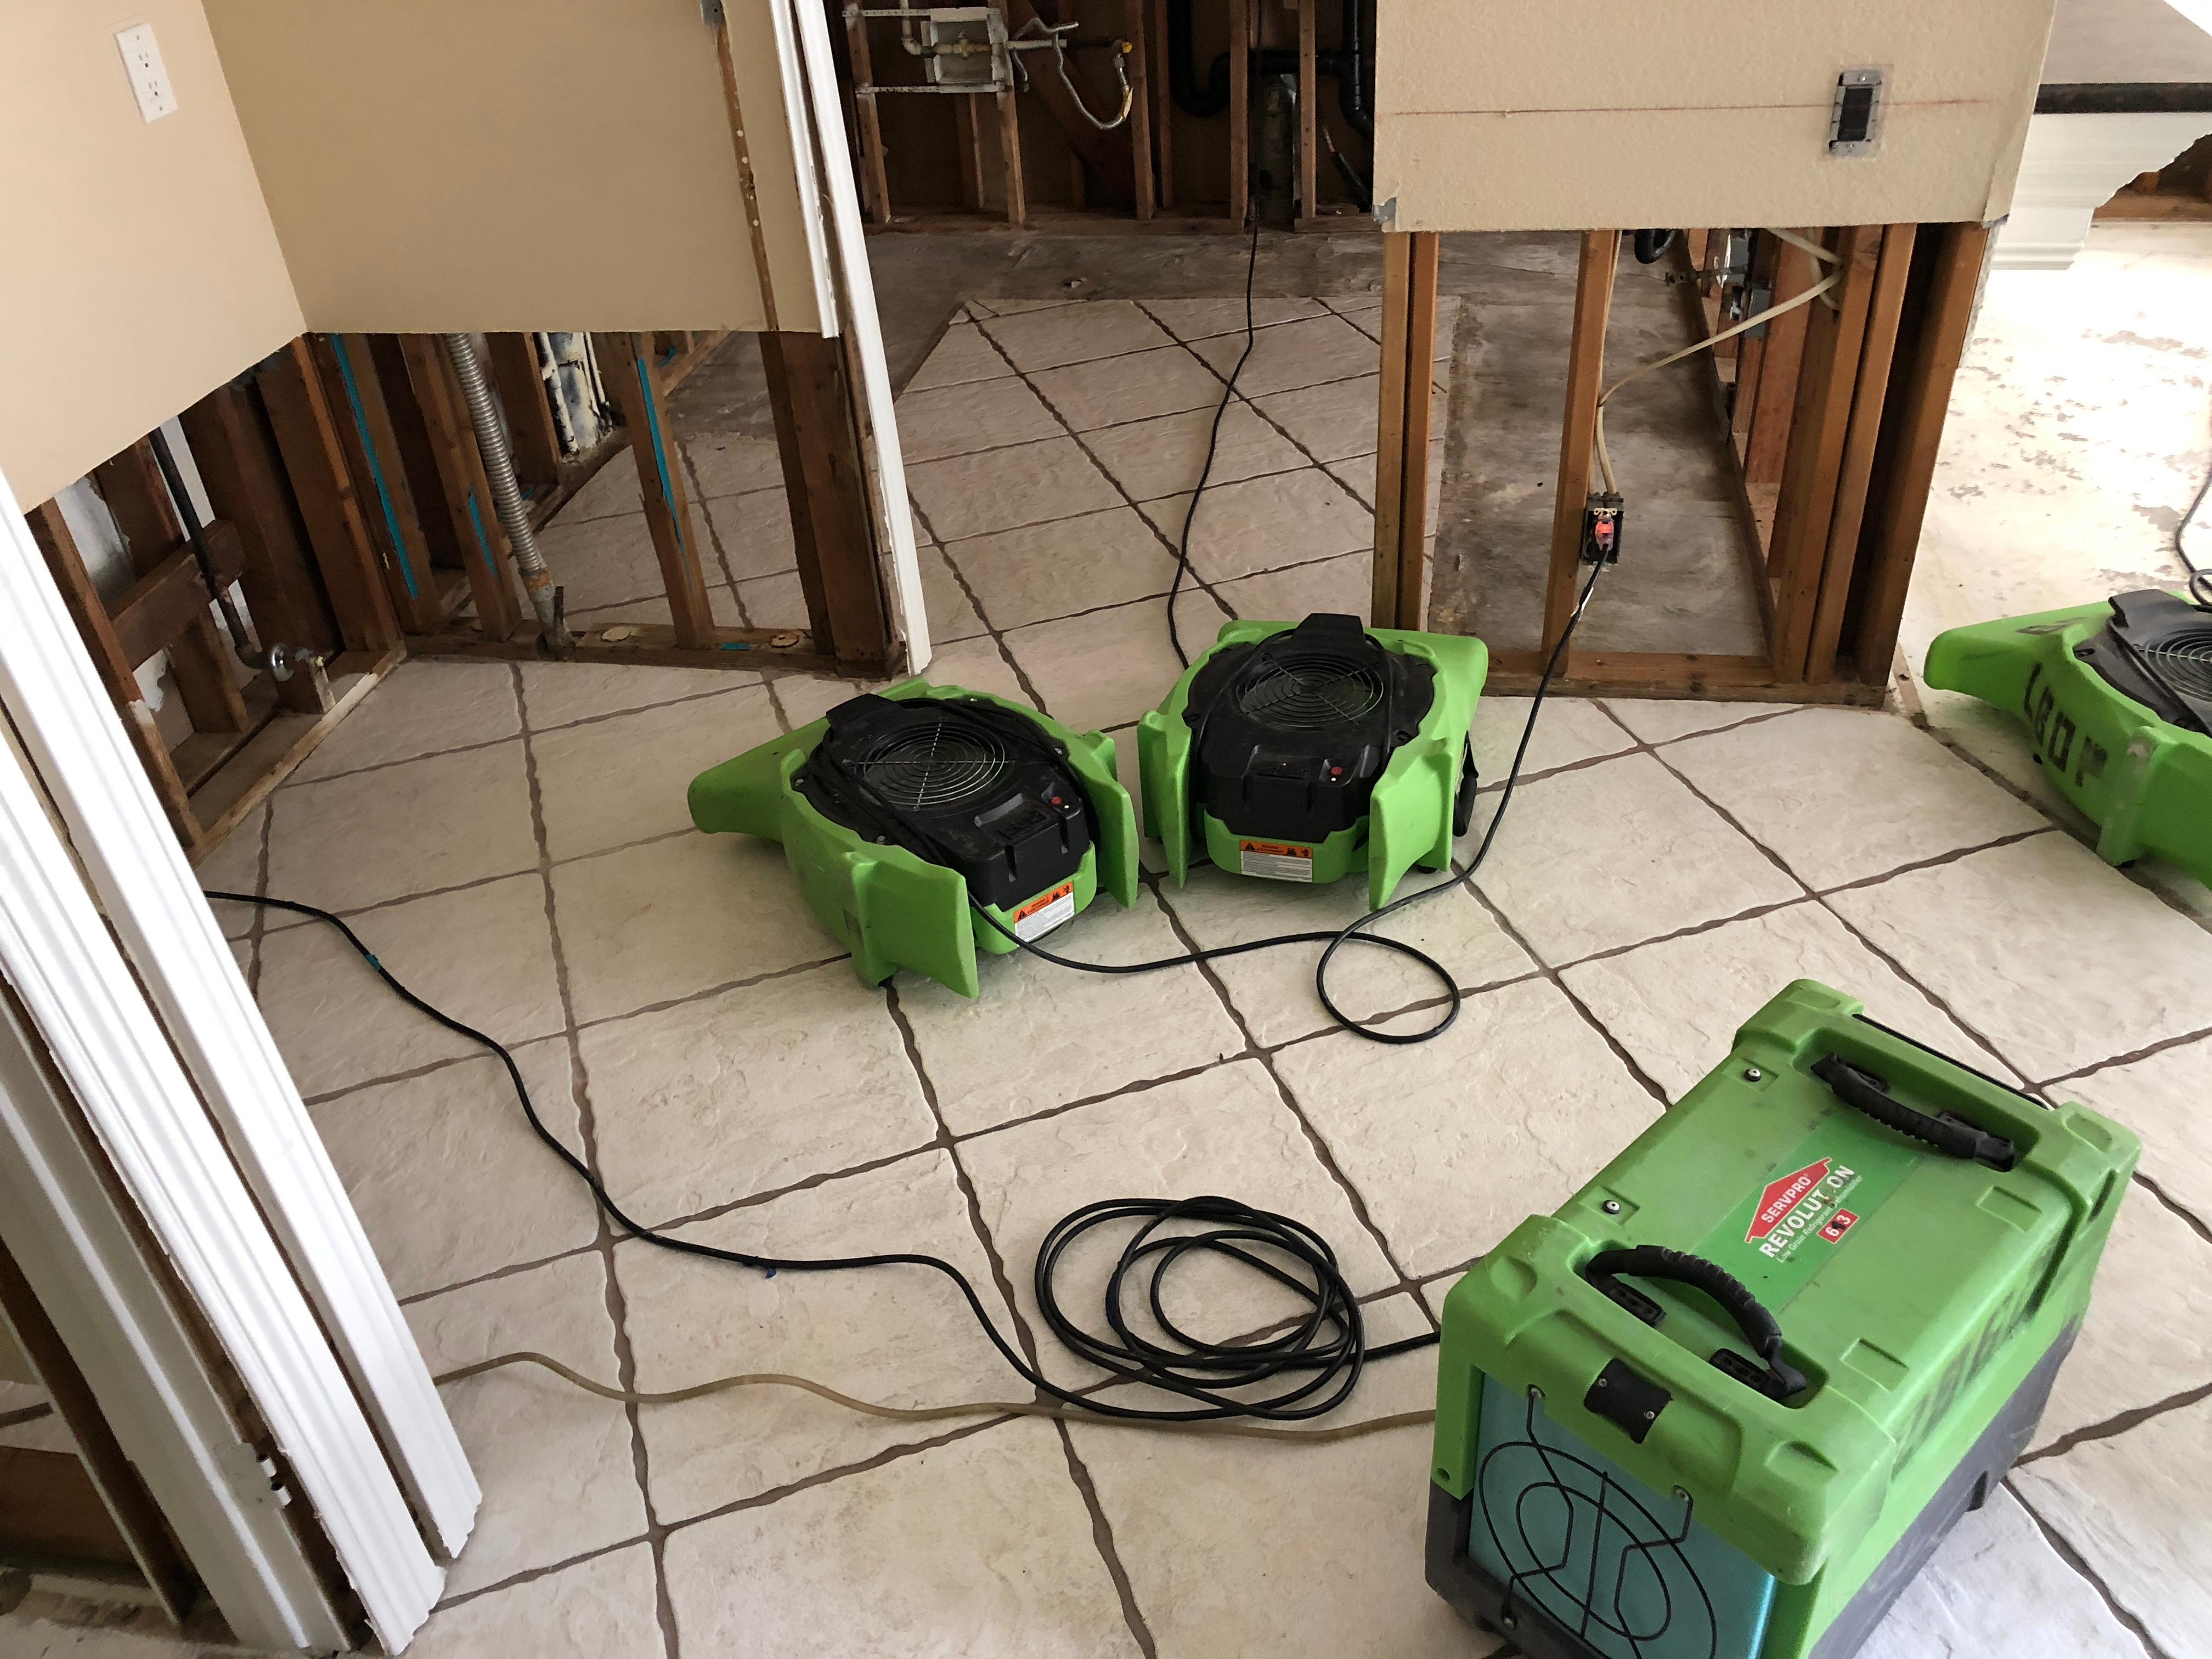 Got the SERVPRO equipment up and running after a residential water loss.